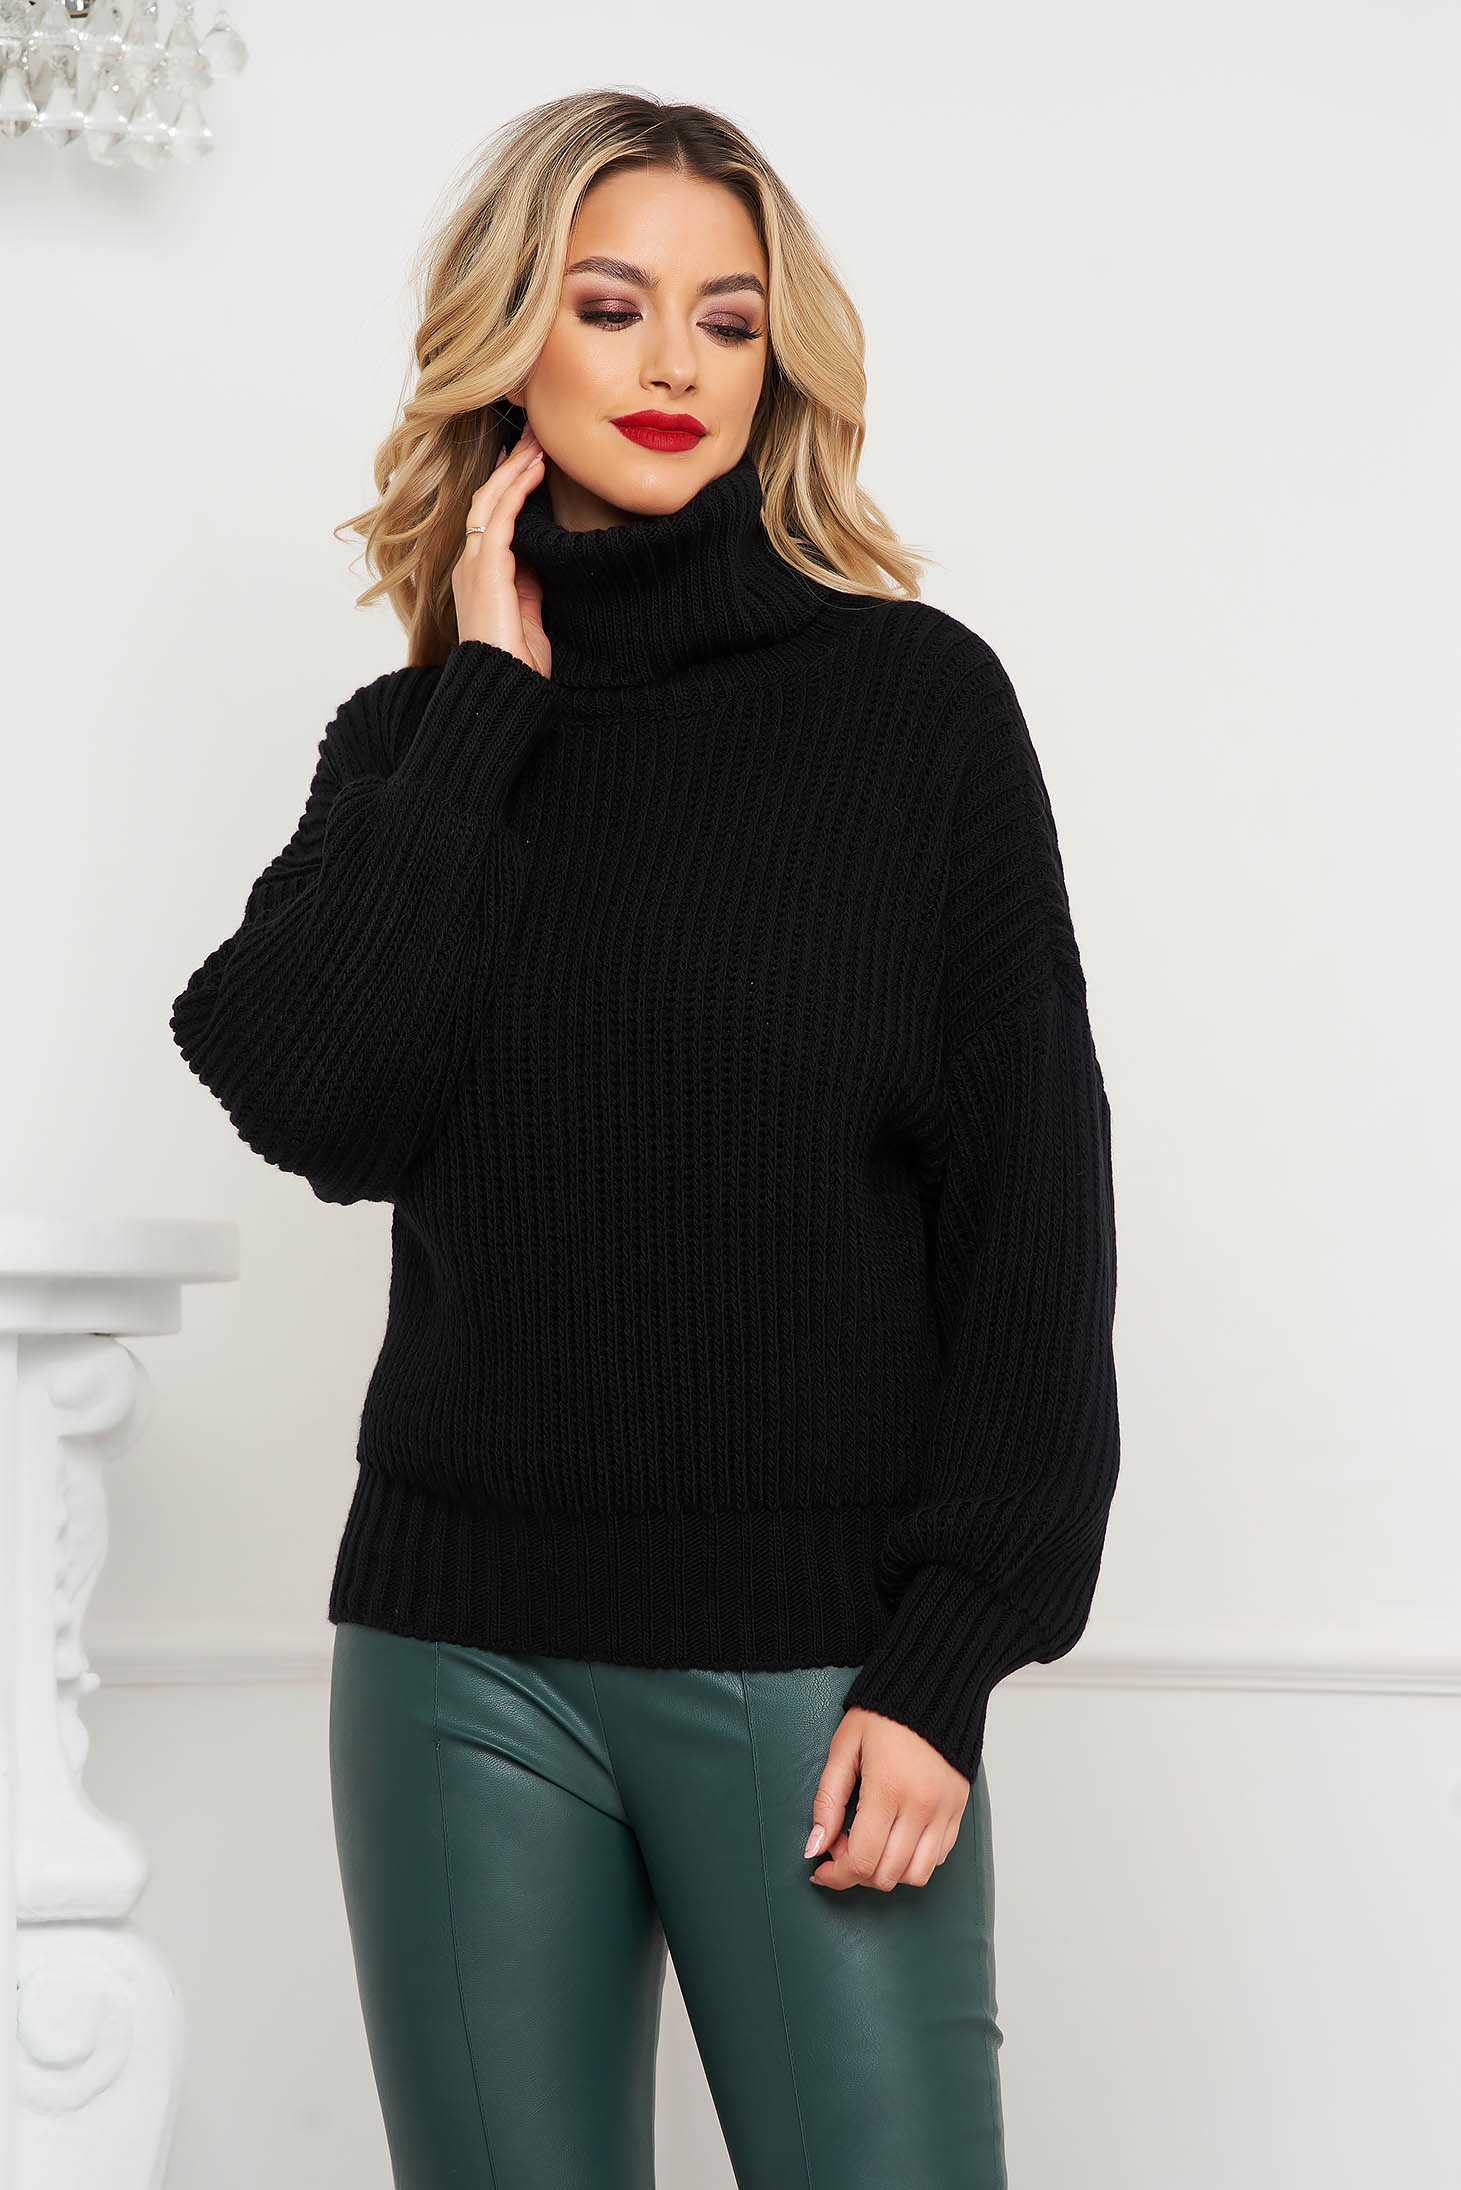 Black sweater knitted thick fabric with turtle neck loose fit